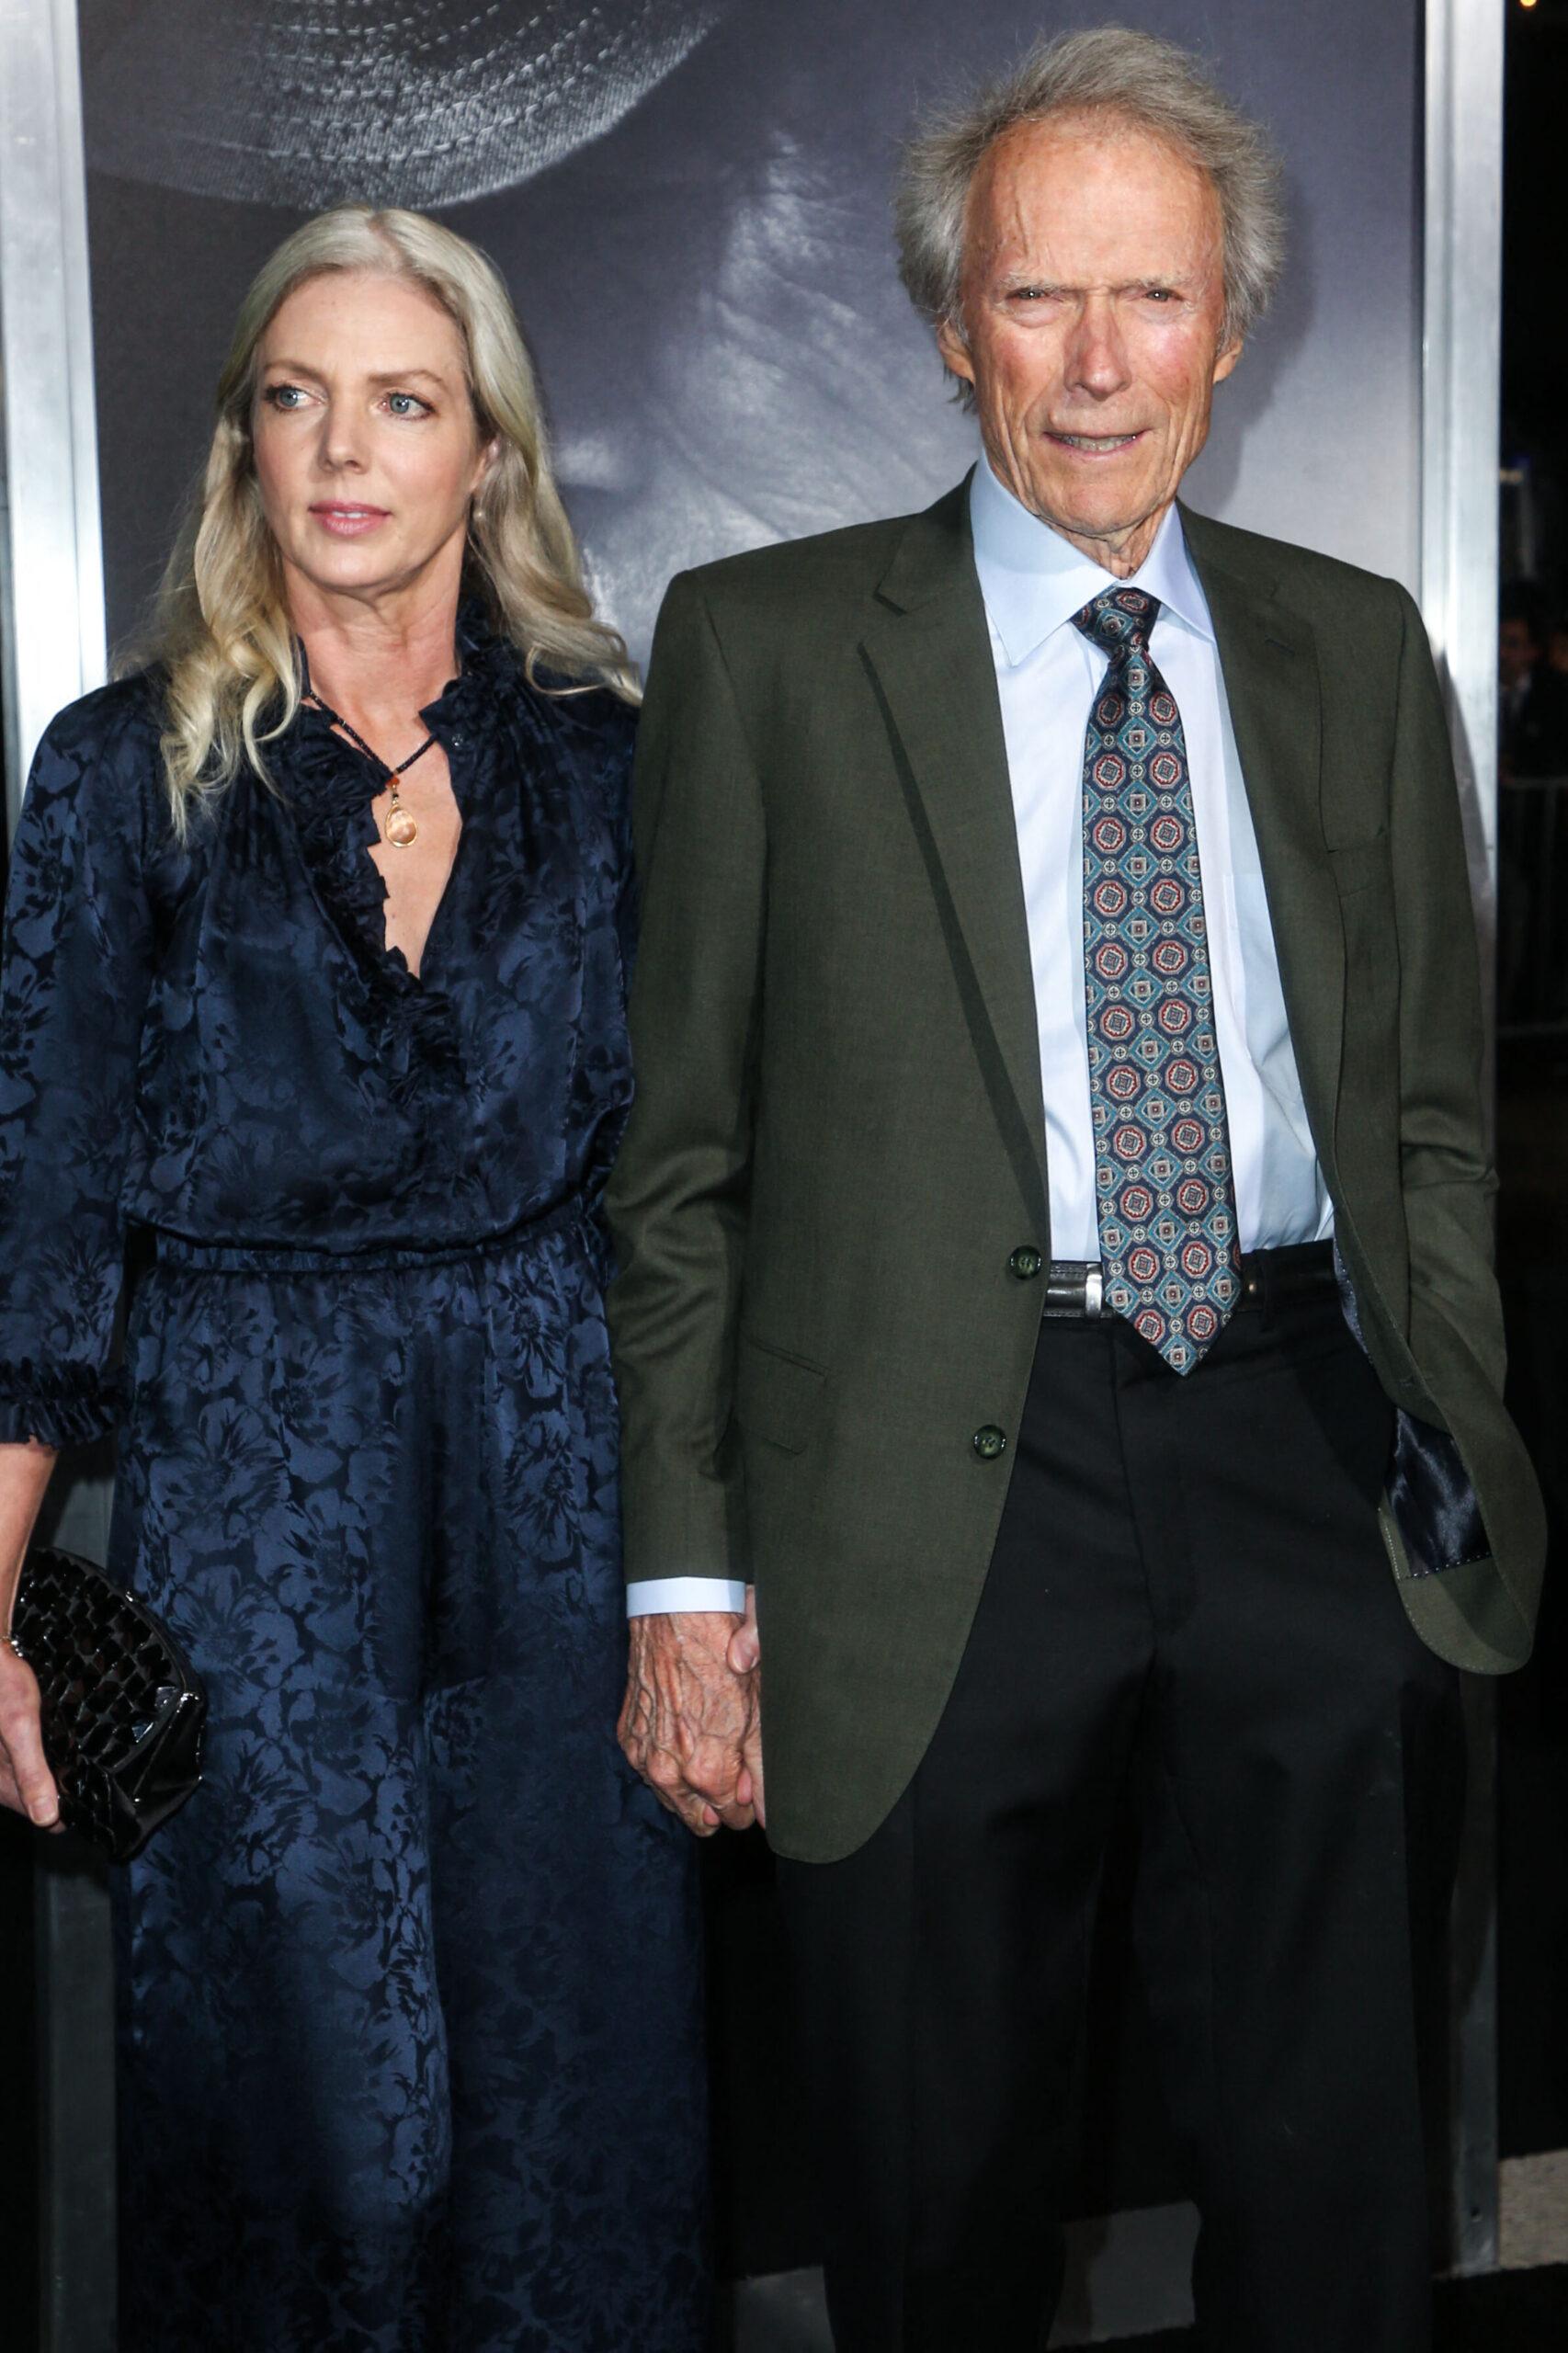 Clint Eastwood and Christina Sandera at Los Angeles Premiere of Warner Bros. Pictures' 'The Mule' - Red Carpet